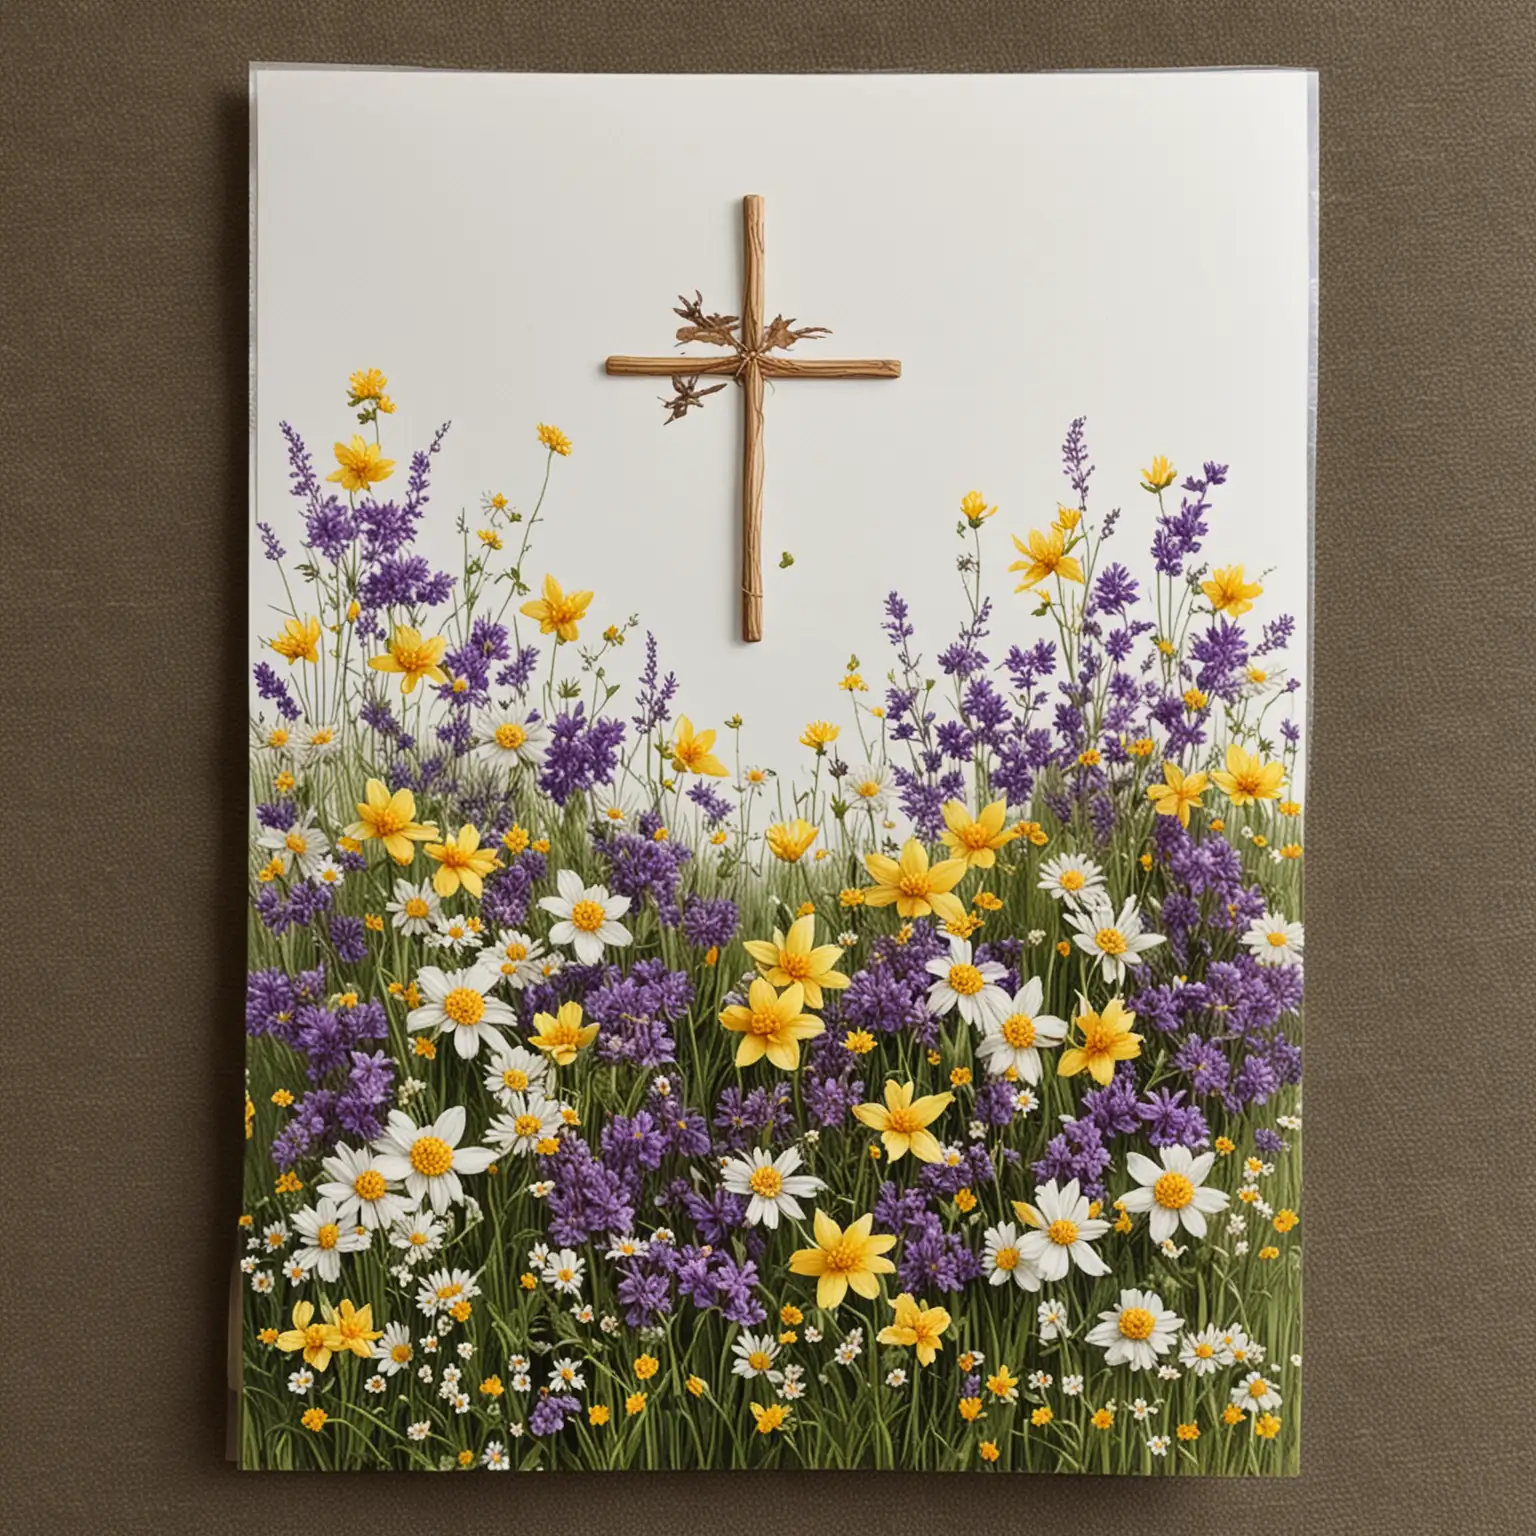 Easter Card size: 11.5 x 17 cm. Field with Easter flowers - wild flowers in purple, yellow and white. Top right hand corner to have a cross design added